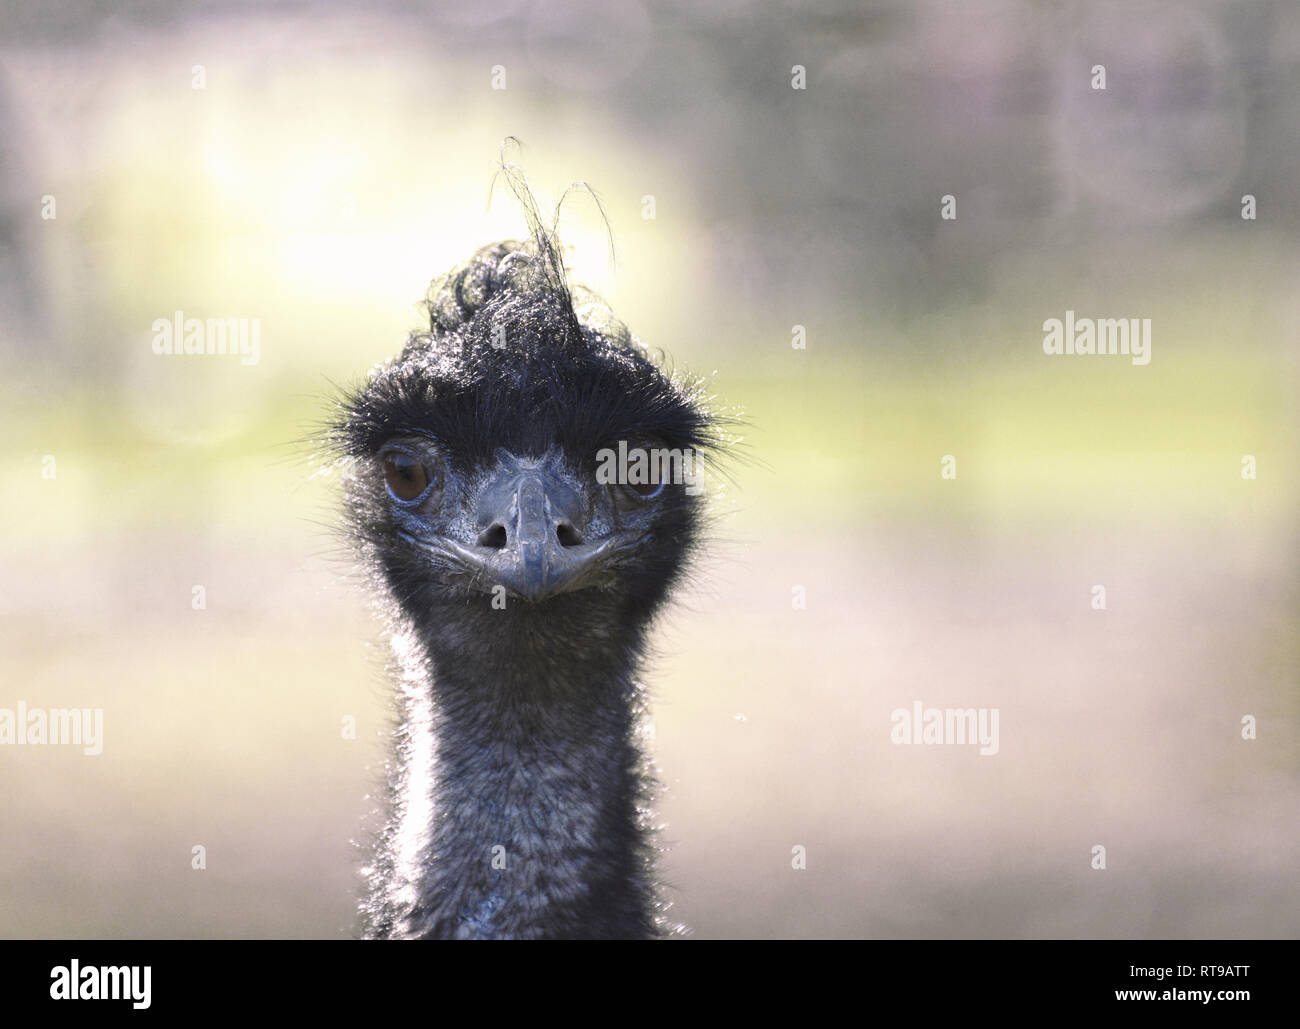 Emu Portrait (close up head and face with direct eye contact) Stock Photo